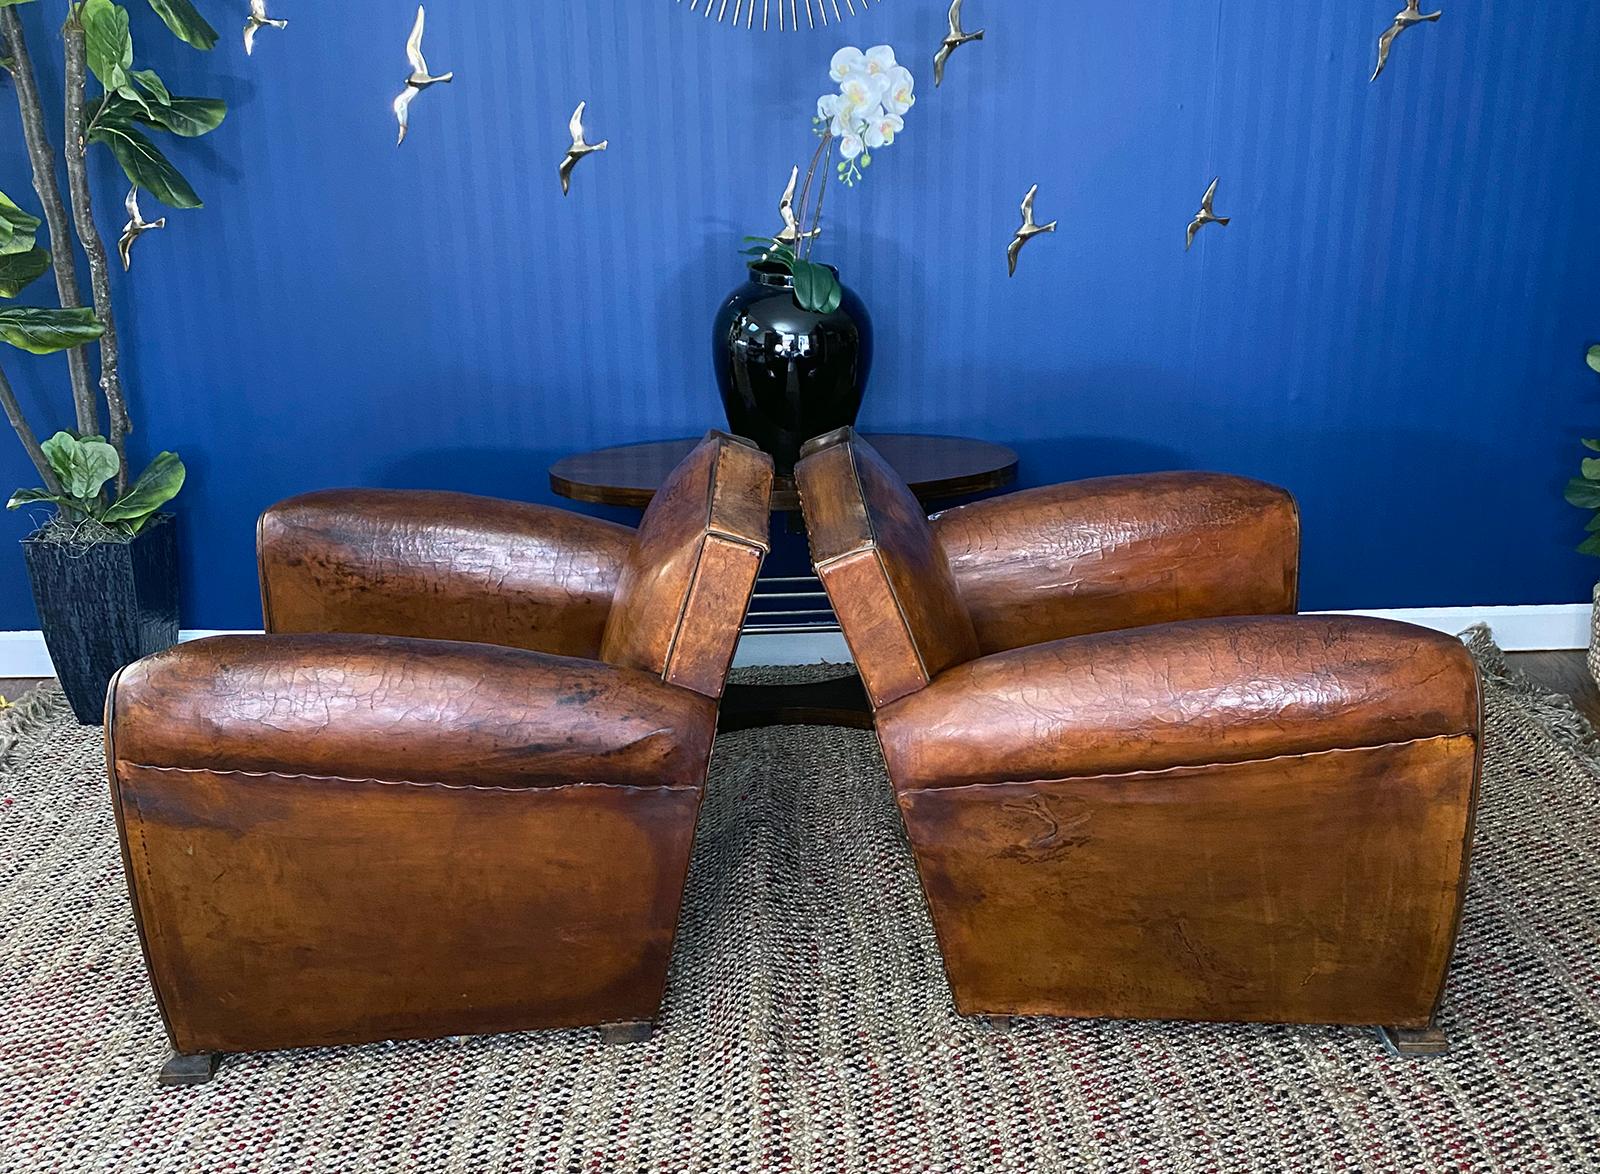 Pair of moustache original Art Deco French leather club chairs, circa 1930s with spectacular soft and supple original leather. This is a beautiful, highly coveted moustache clubs pair with a lot of character and charm. Extremely comfortable. In very